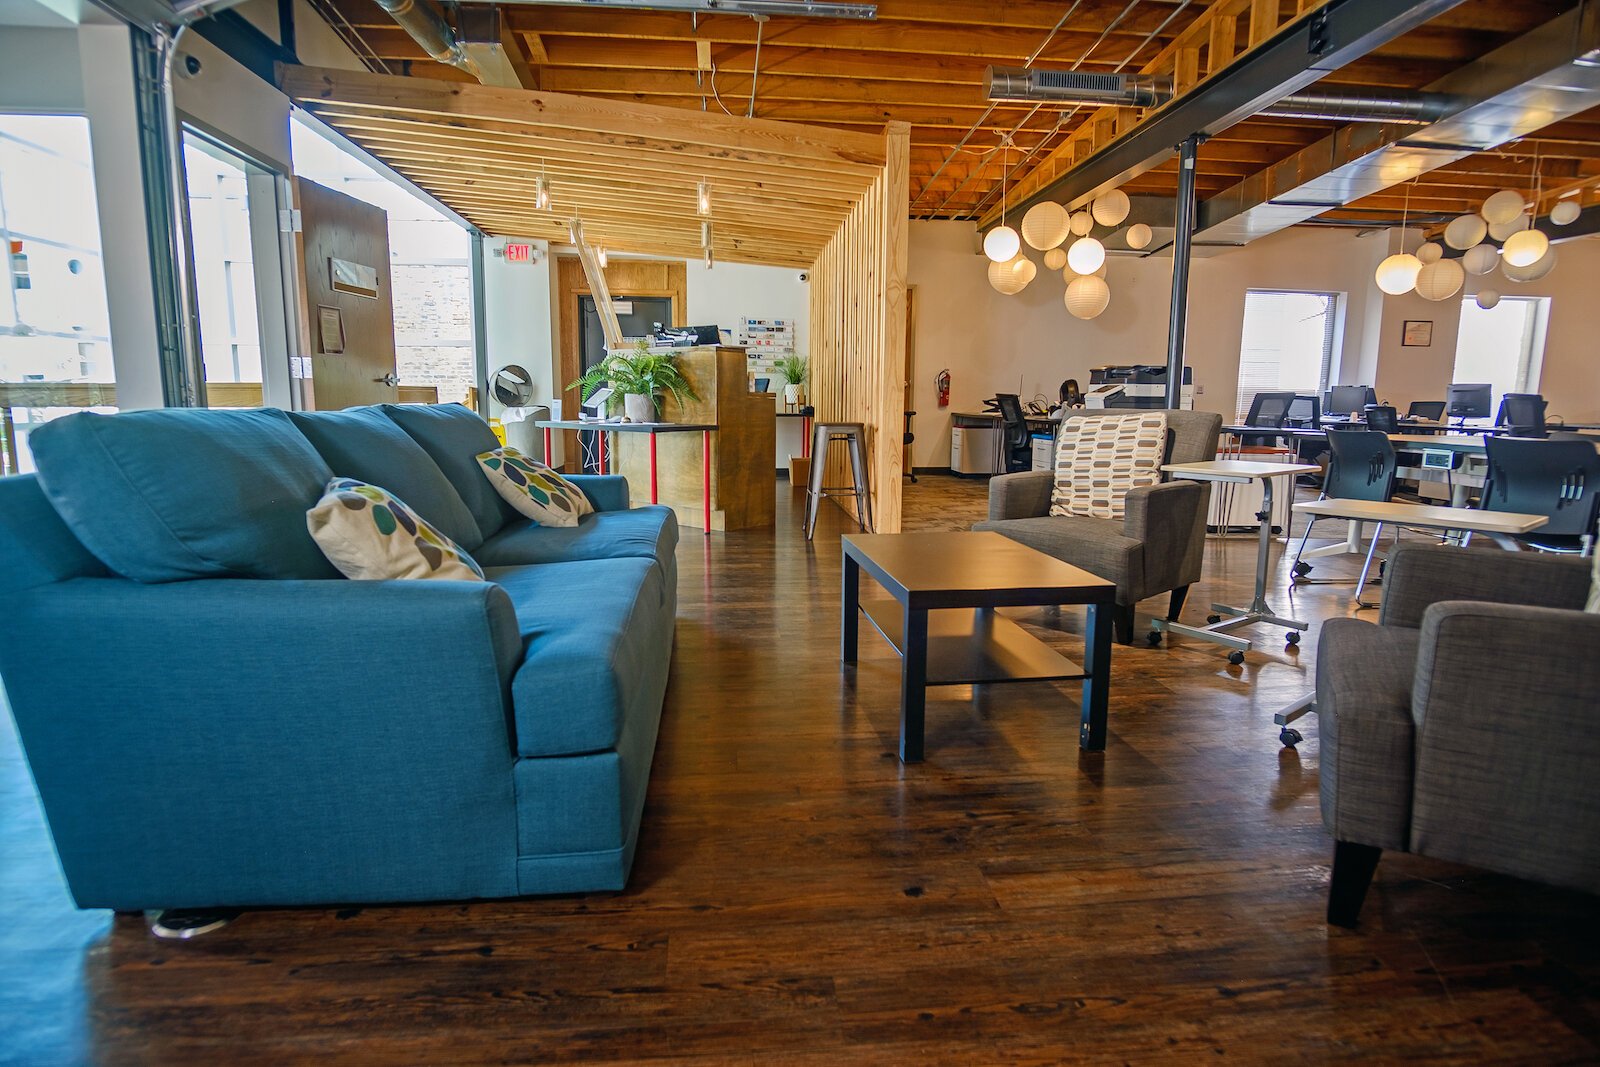 Start Fort Wayne and its coworking space Atrium are located at 111 W. Berry St., Suite 211.